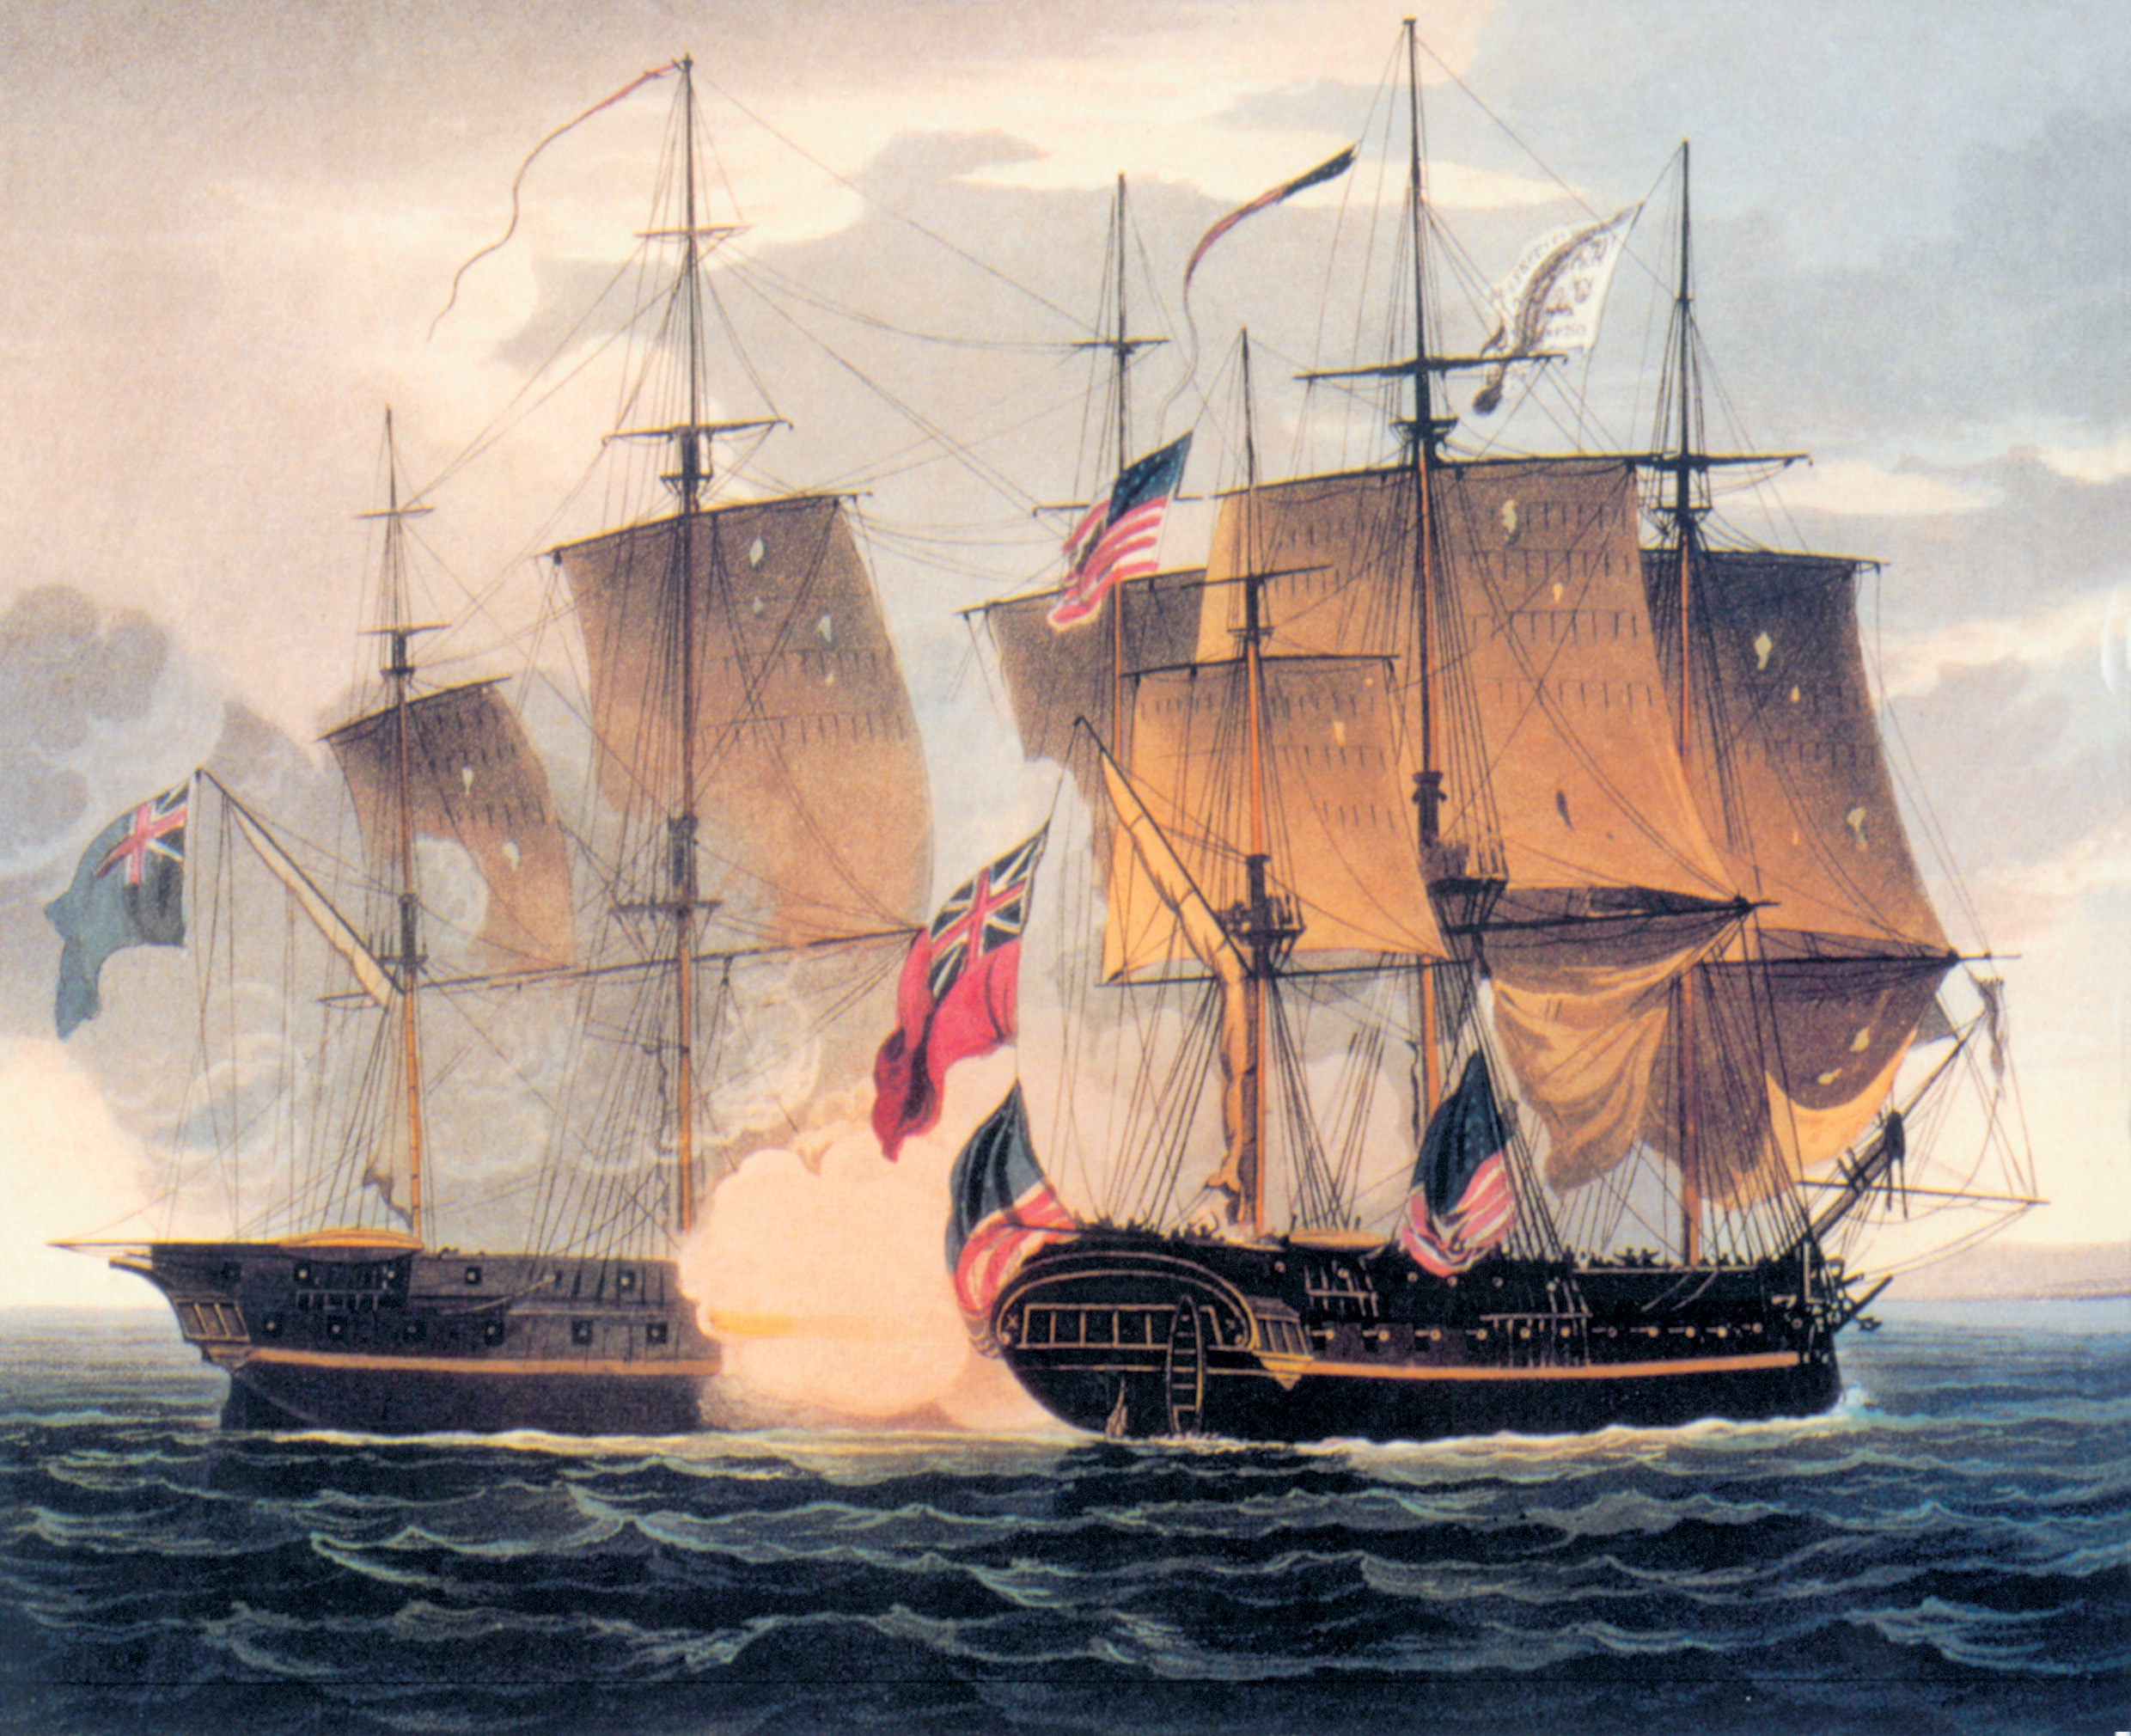 In a classic duel between frigates, the British Shannon unleashes a broadside on the American Chesa- peake in 1813. Chesapeake’s captain James Lawrence said, “Don’t give up the ship!”